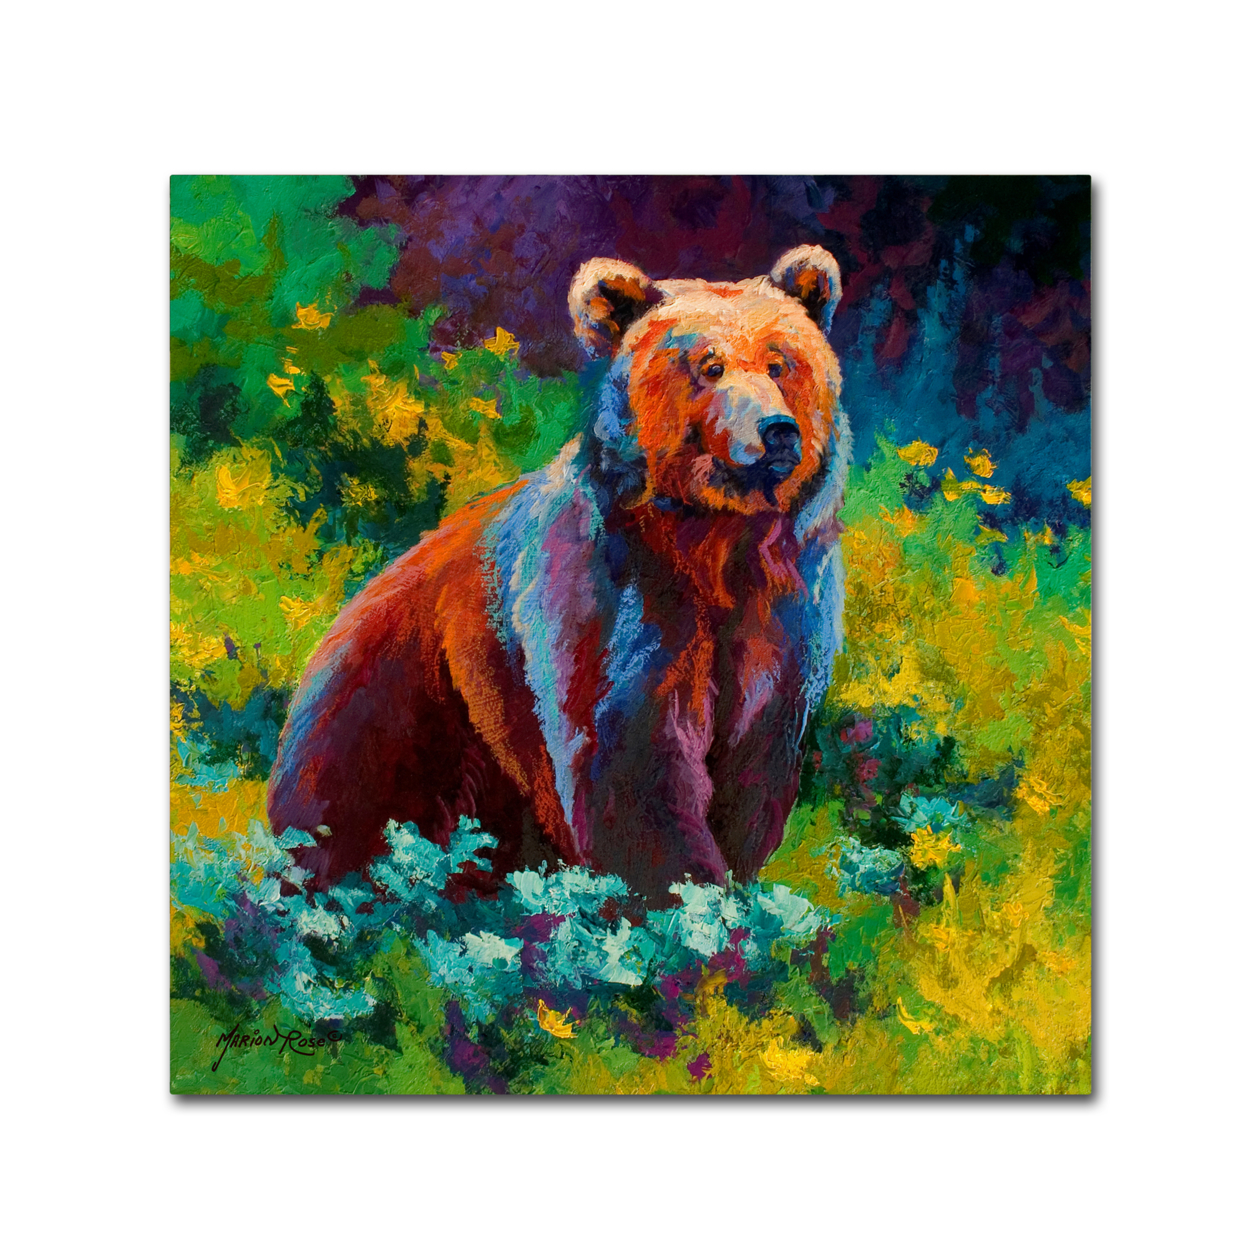 Marion Rose 'Wildflower Grizz' Ready To Hang Canvas Art 35 X 35 Inches Made In USA